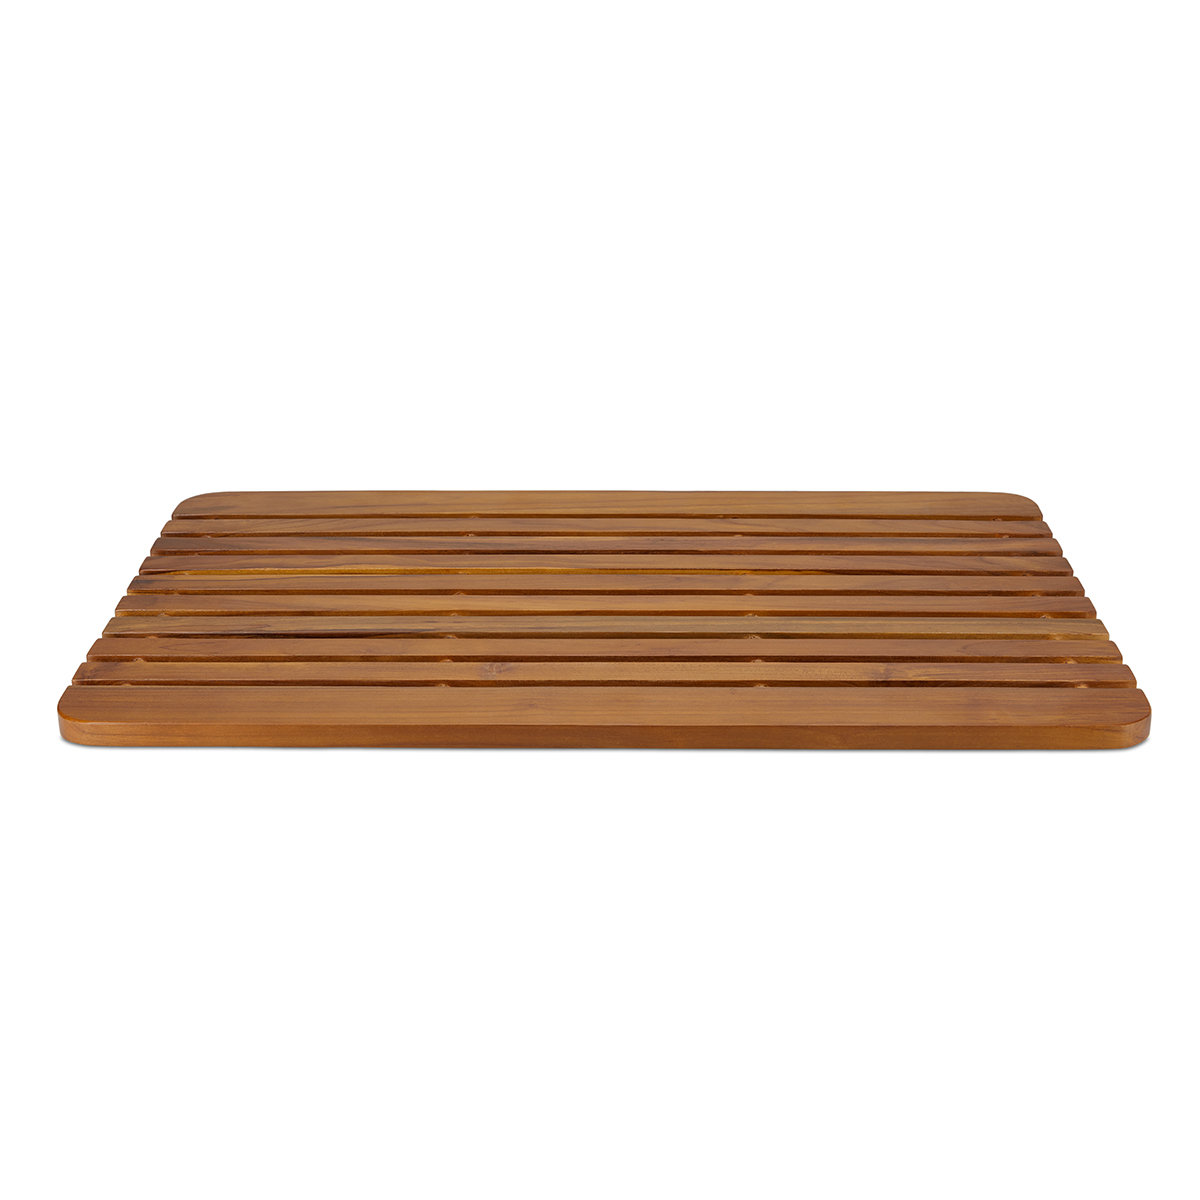 Home+Solutions Bamboo Tile Step-Out Bath Mat, 18x30